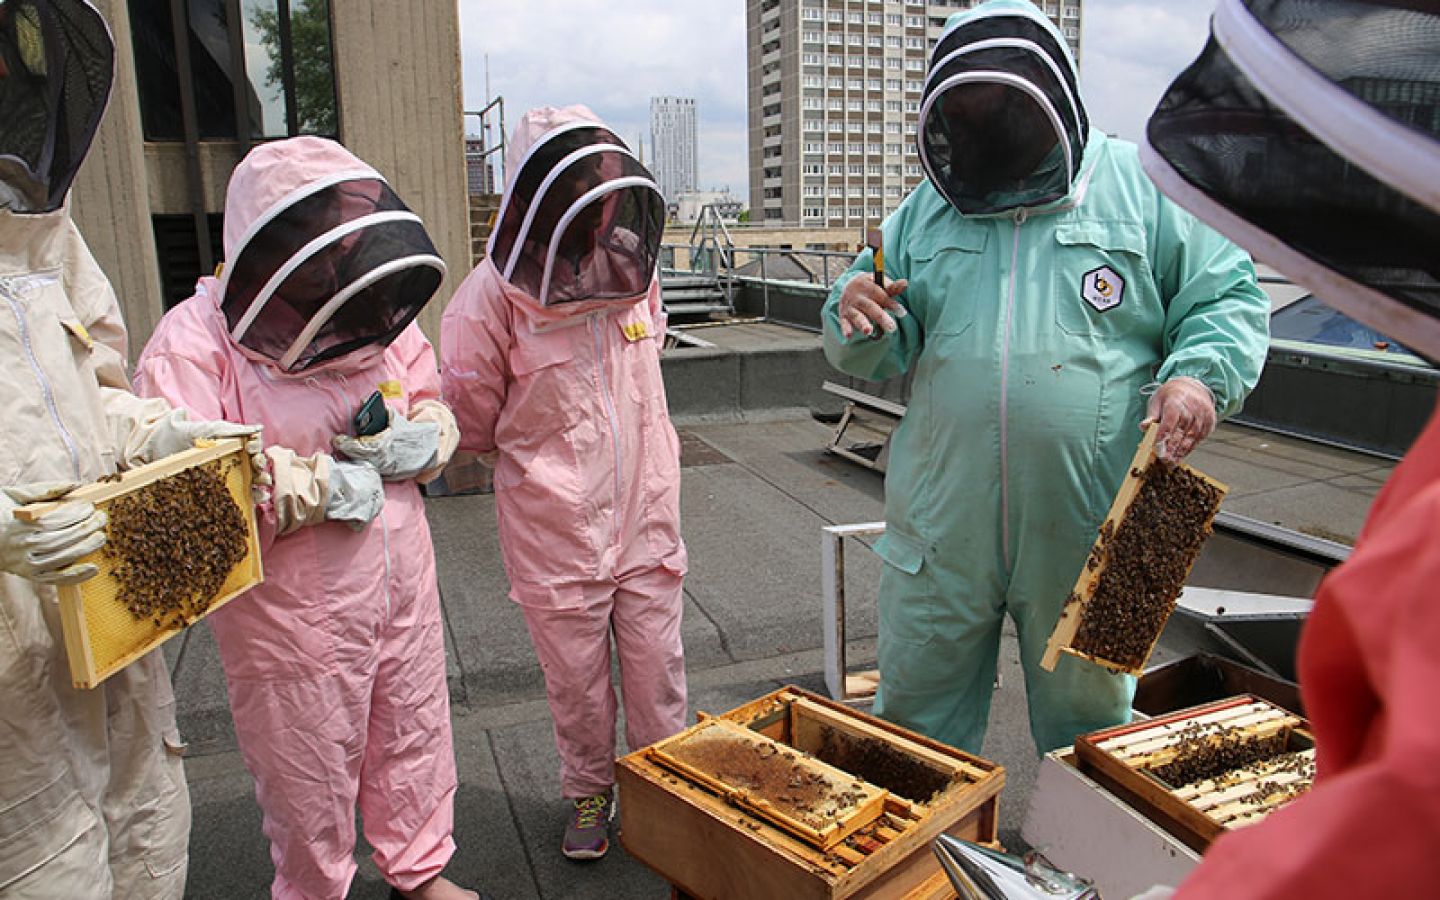 Students and staff learn about bees at City's hive